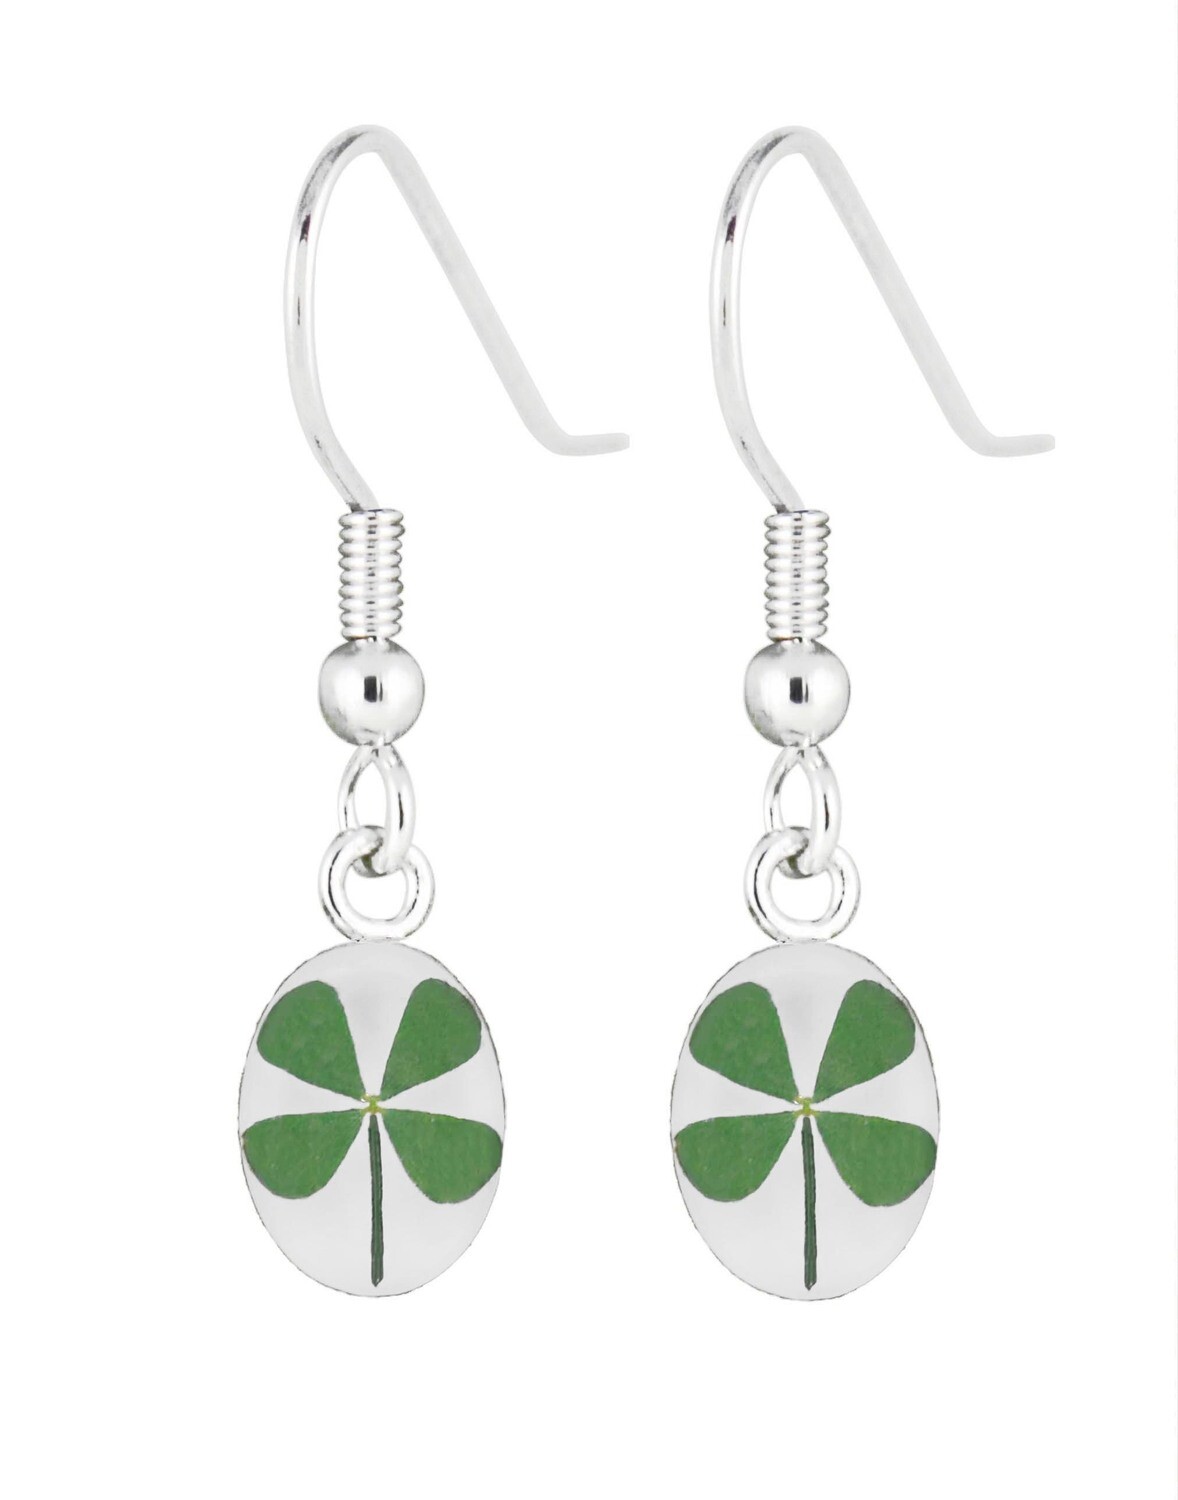 Four-Leaf Clover, Oval Hanging Earrings, White Background